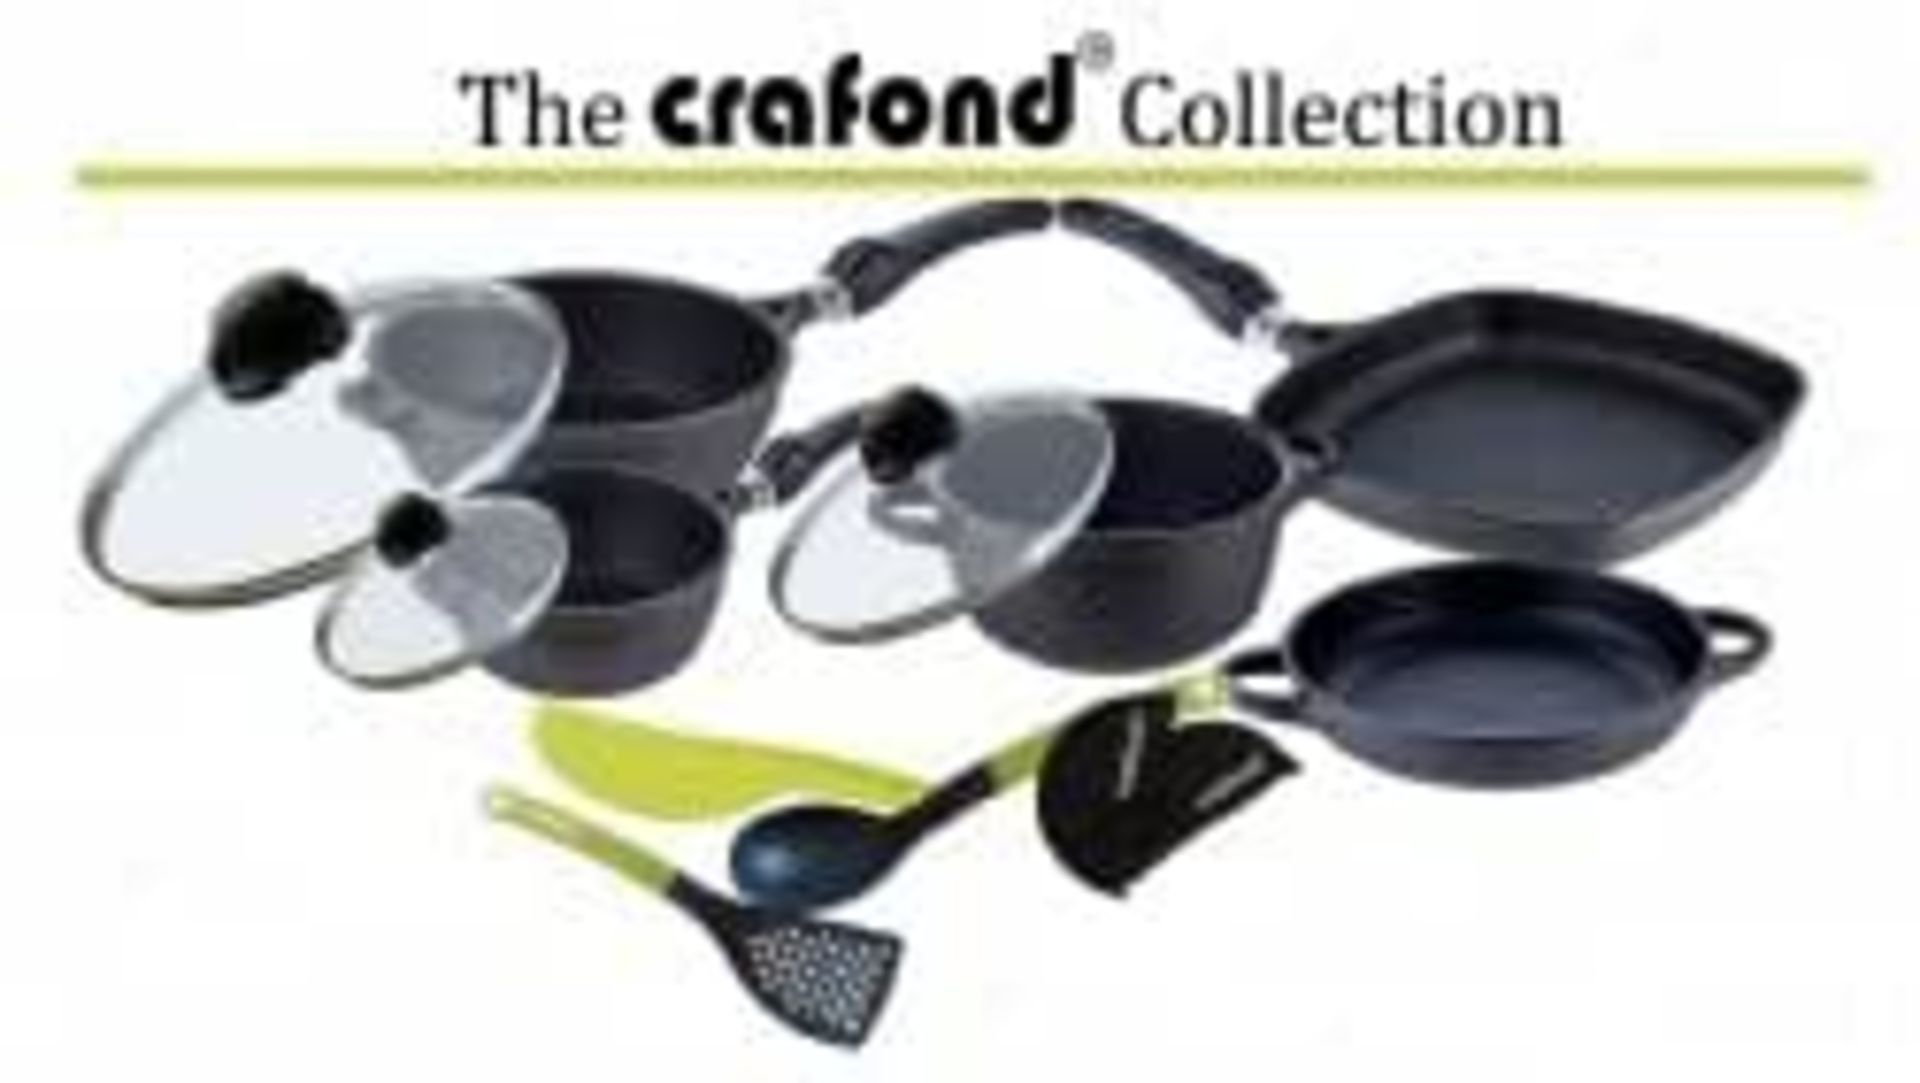 Crafond 24cm Saute Pan with detachable handle and lid - Image 2 of 4